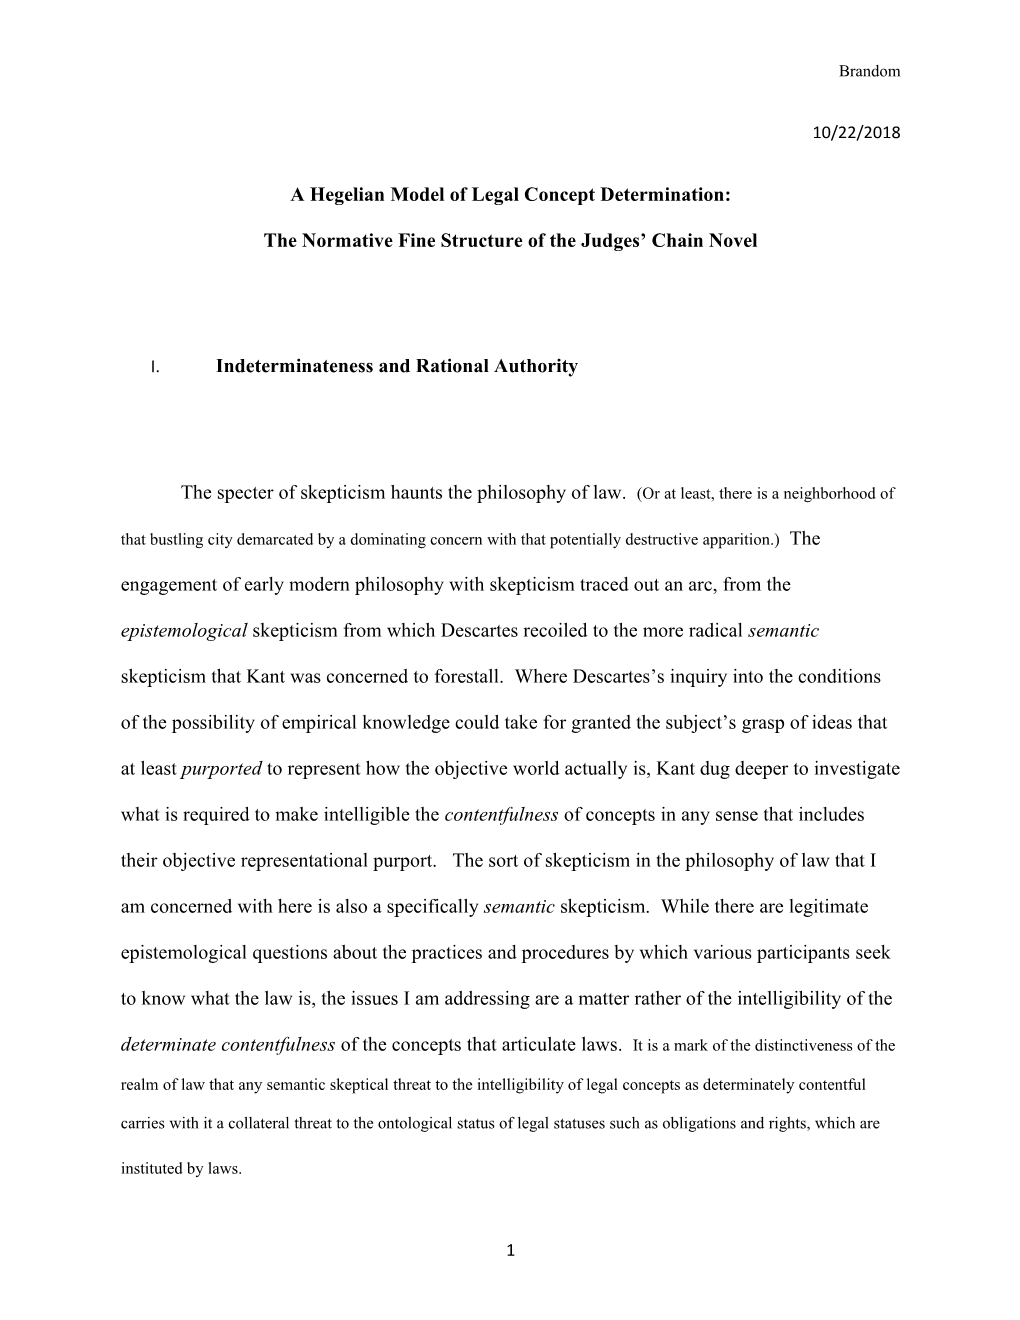 A Hegelian Model of Legal Concept Determination